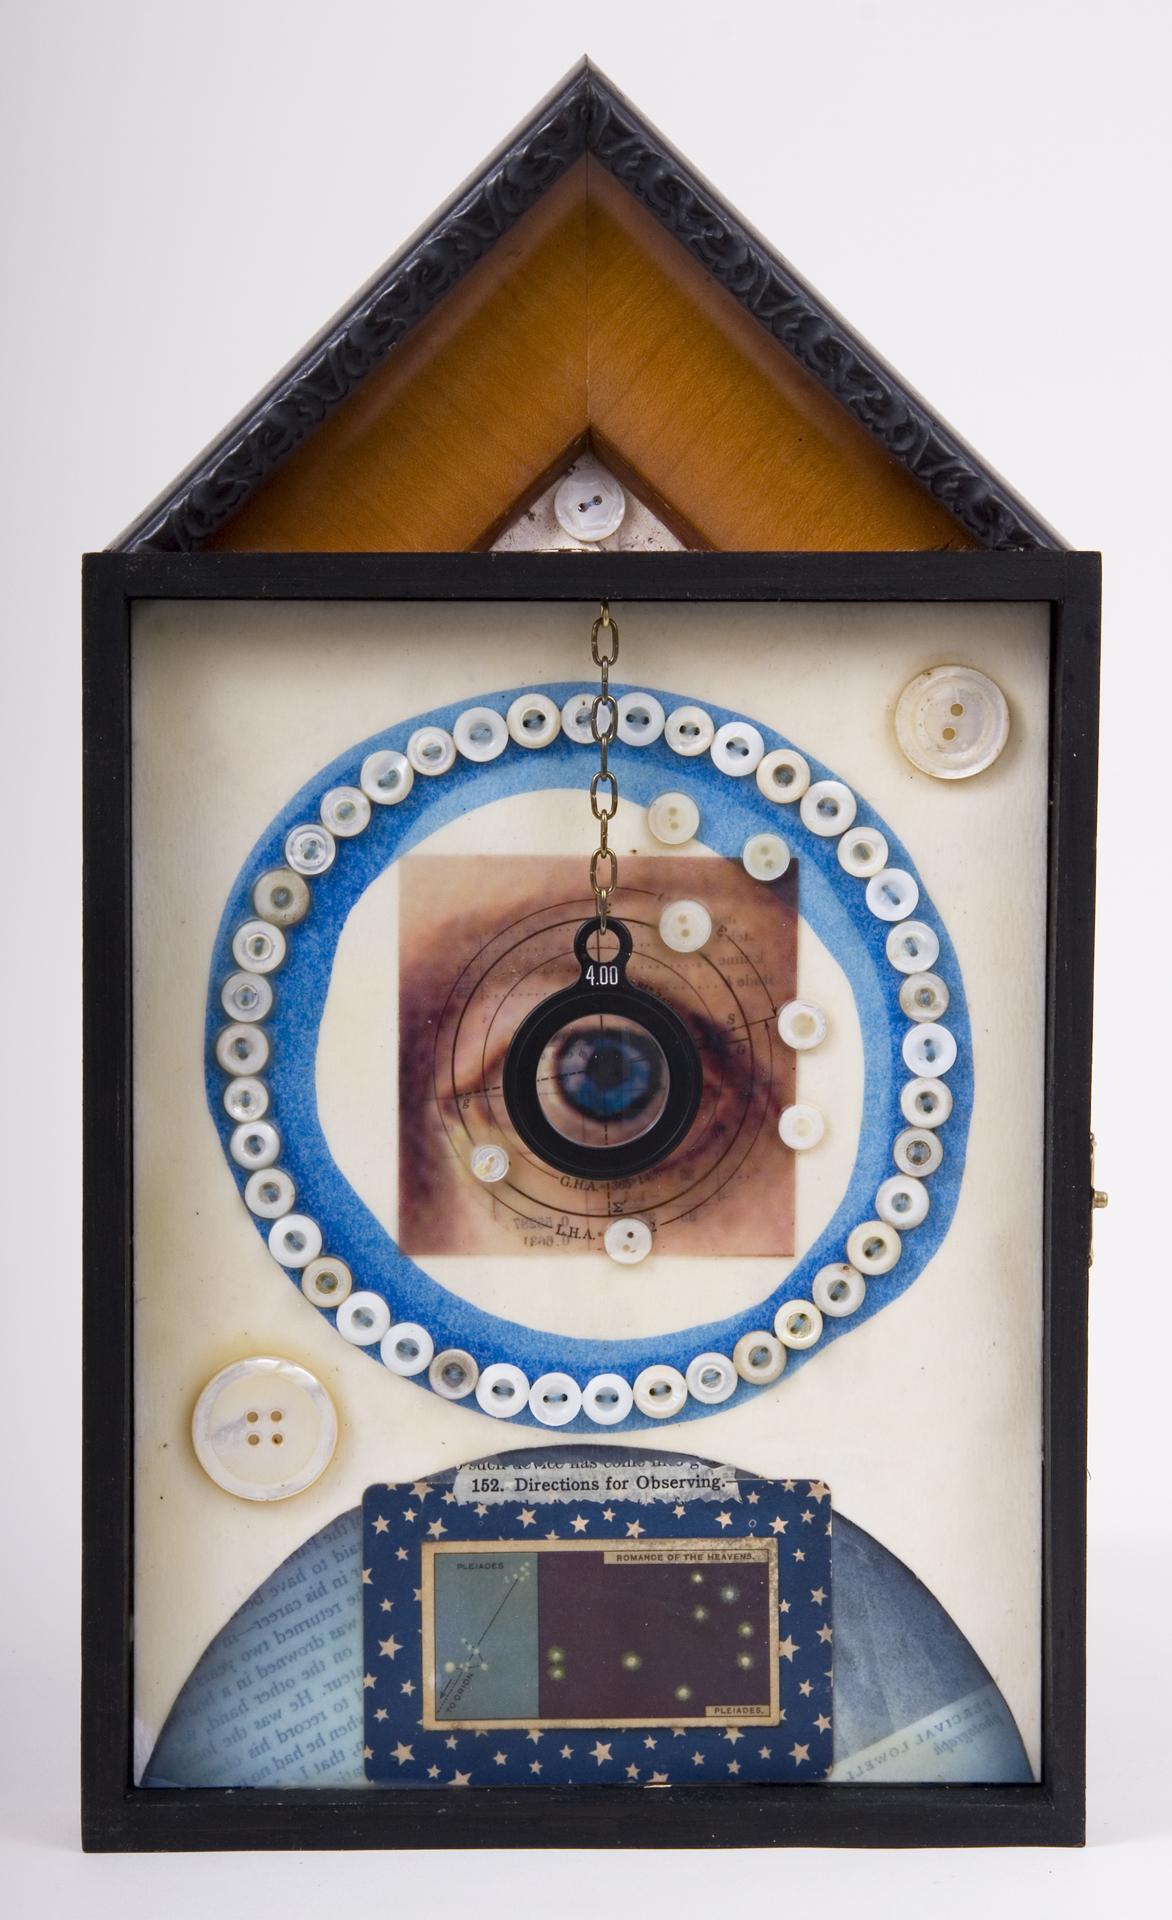     \"152. Directions for Observing\"
    mixed-media assemblage
    13.25 x 7.5 x 1.25
    2009
    SOLD
    Cigar box, frame sample, birch bark, mother of pearl buttons, fortune & tobac cards, transparency, optical lens, ink, wax, astronomy text on watercolor paper